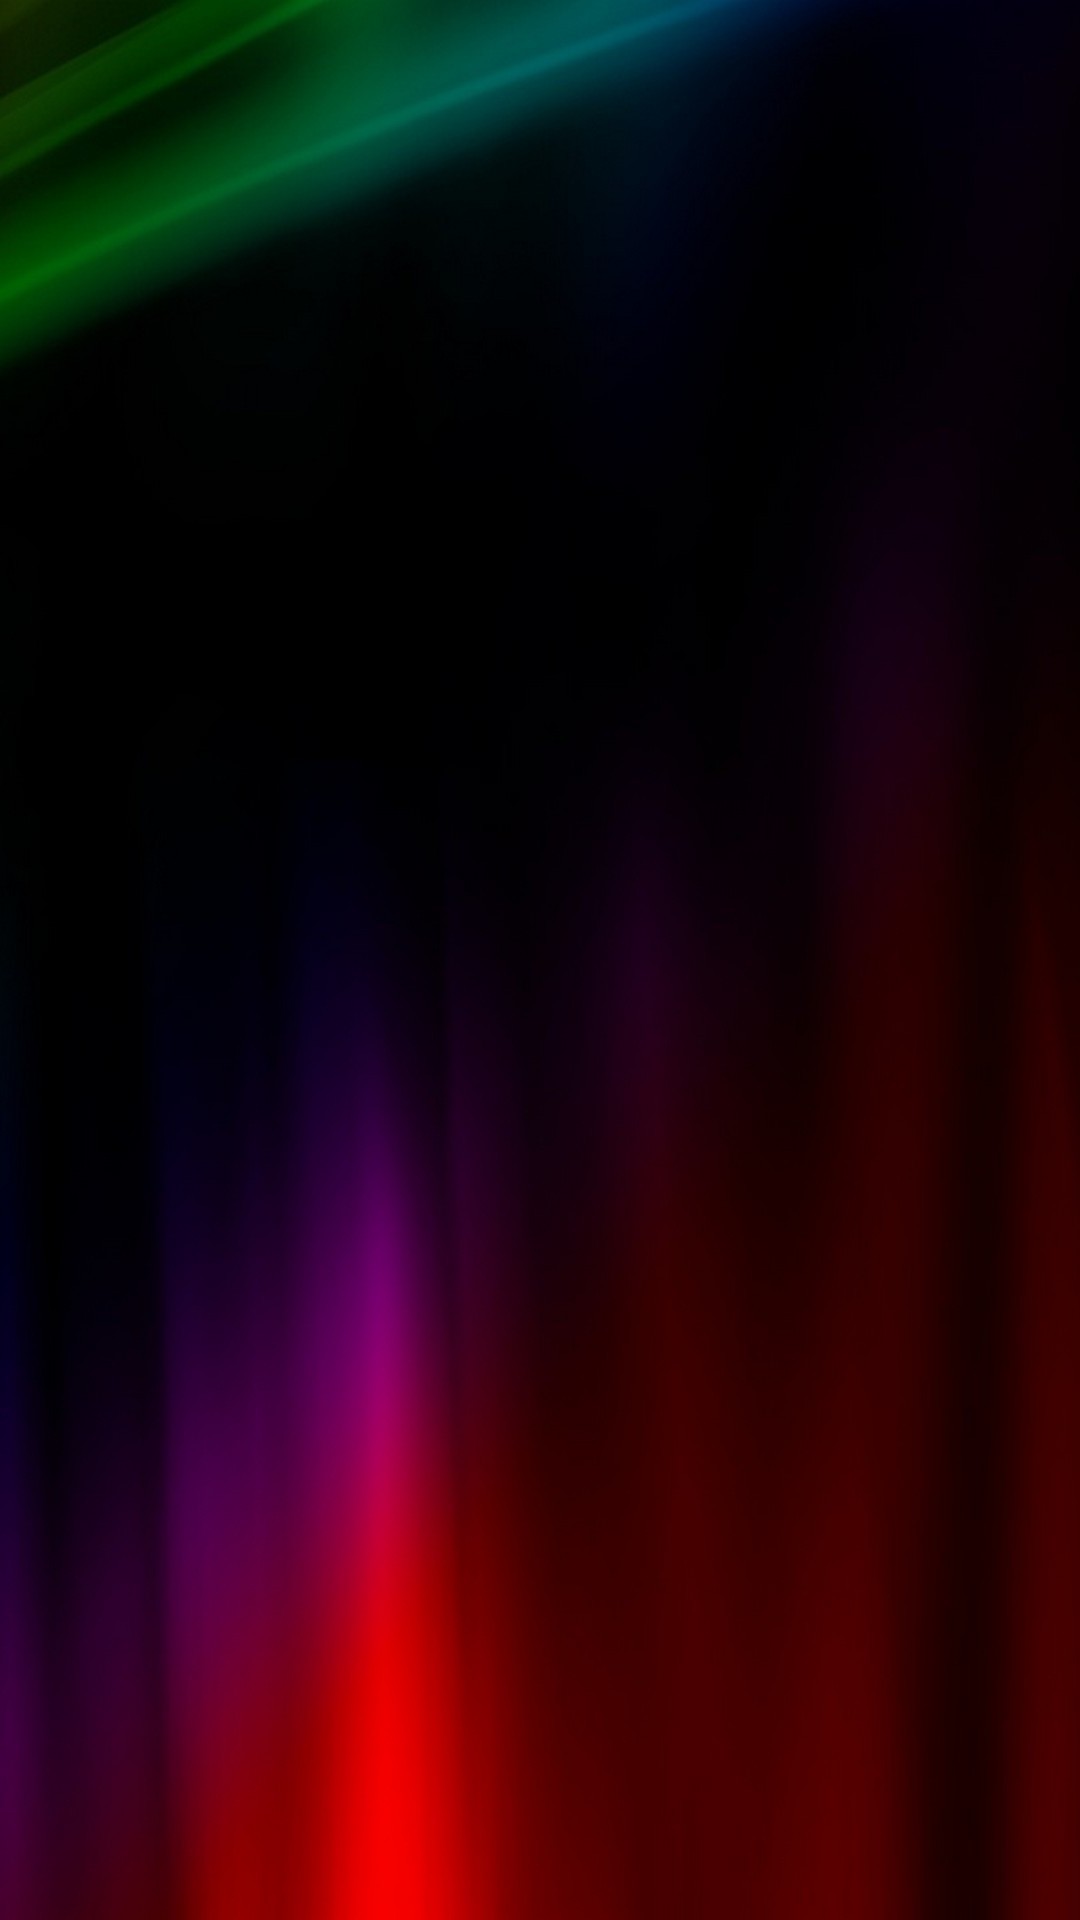 Rainbow Wallpaper For Phone HD with high-resolution 1080x1920 pixel. Download all Mobile Wallpapers and Use them as wallpapers for your iPhone, Tablet, iPad, Android and other mobile devices